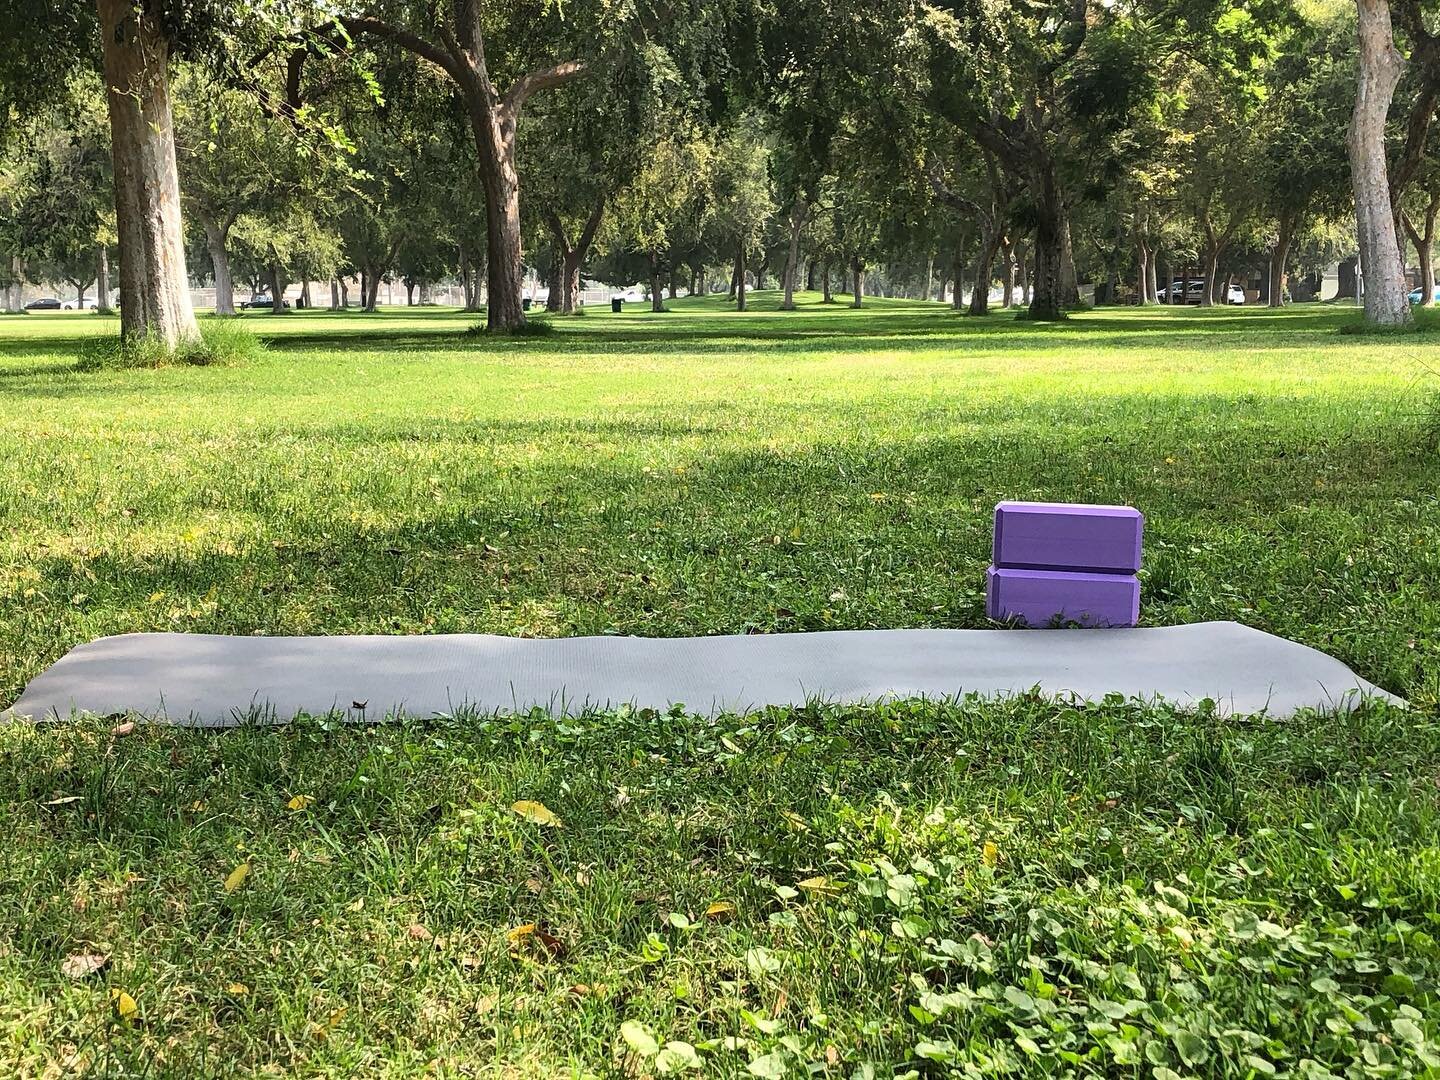 I teach yoga in the park Sundays at 9:30am. We gather about 600 feet east of the community center, under the trees. (Across the street from 5834 Parkcrest Street)

Bring water, a yoga mat, towels or blankets, and yoga blocks if you like! #yoga #yogai